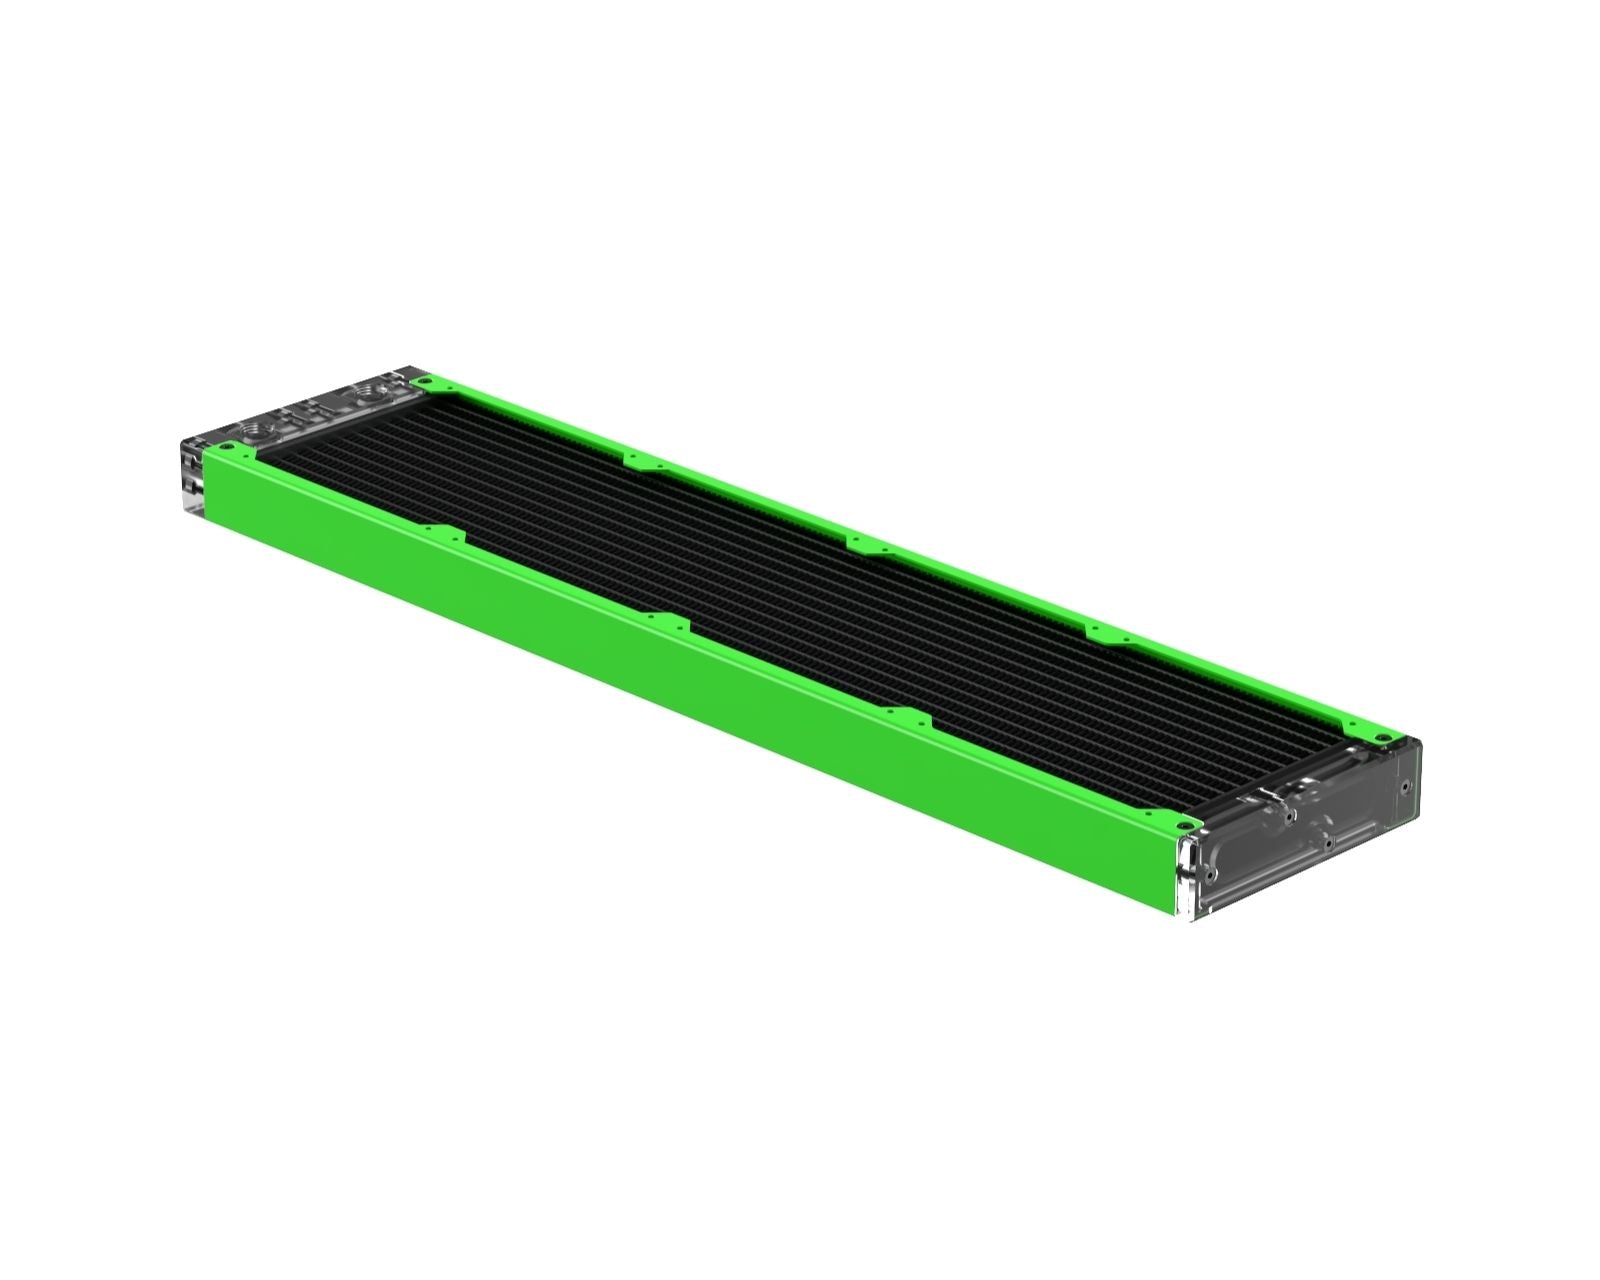 PrimoChill 480SL (30mm) EXIMO Modular Radiator, Clear Acrylic, 4x120mm, Quad Fan (R-SL-A48) Available in 20+ Colors, Assembled in USA and Custom Watercooling Loop Ready - UV Green